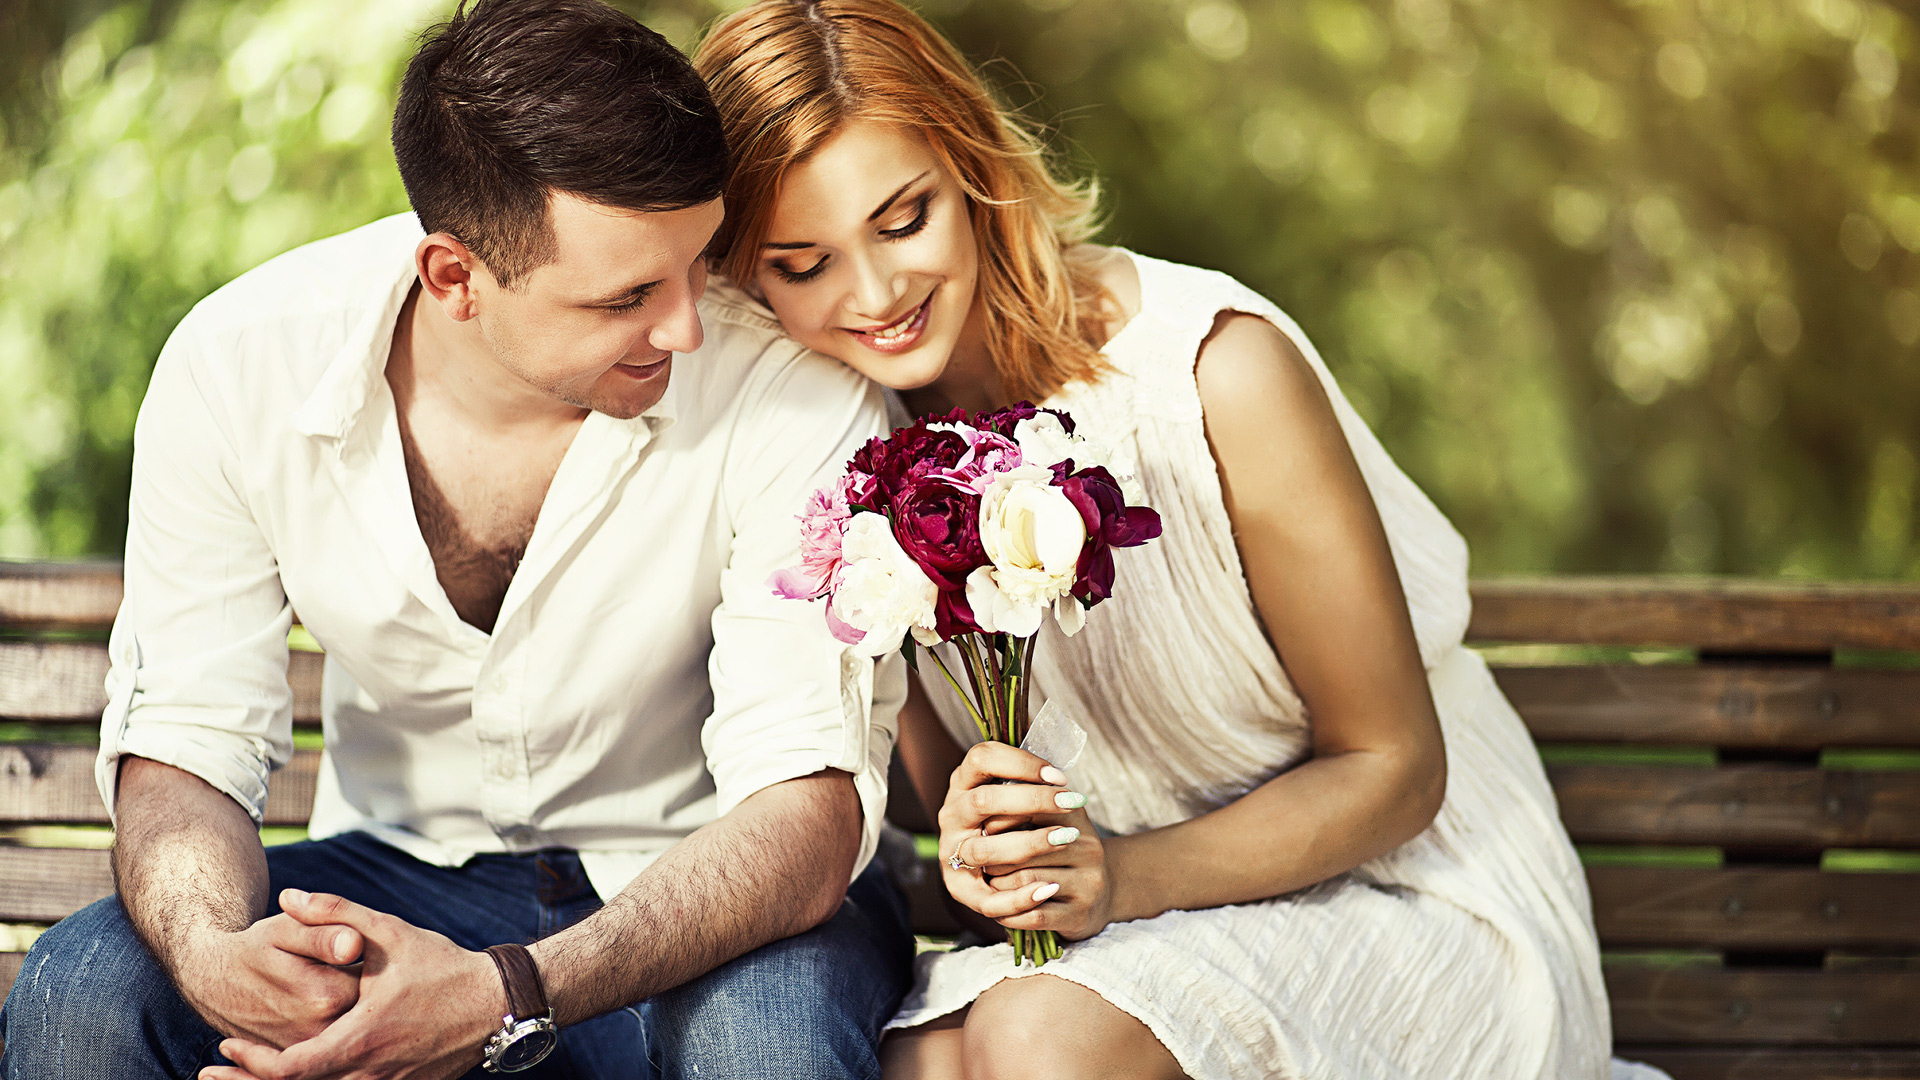 Man in white shirt and woman in white dress sitting next to each other on bench looking at the flowers the woman is holding.